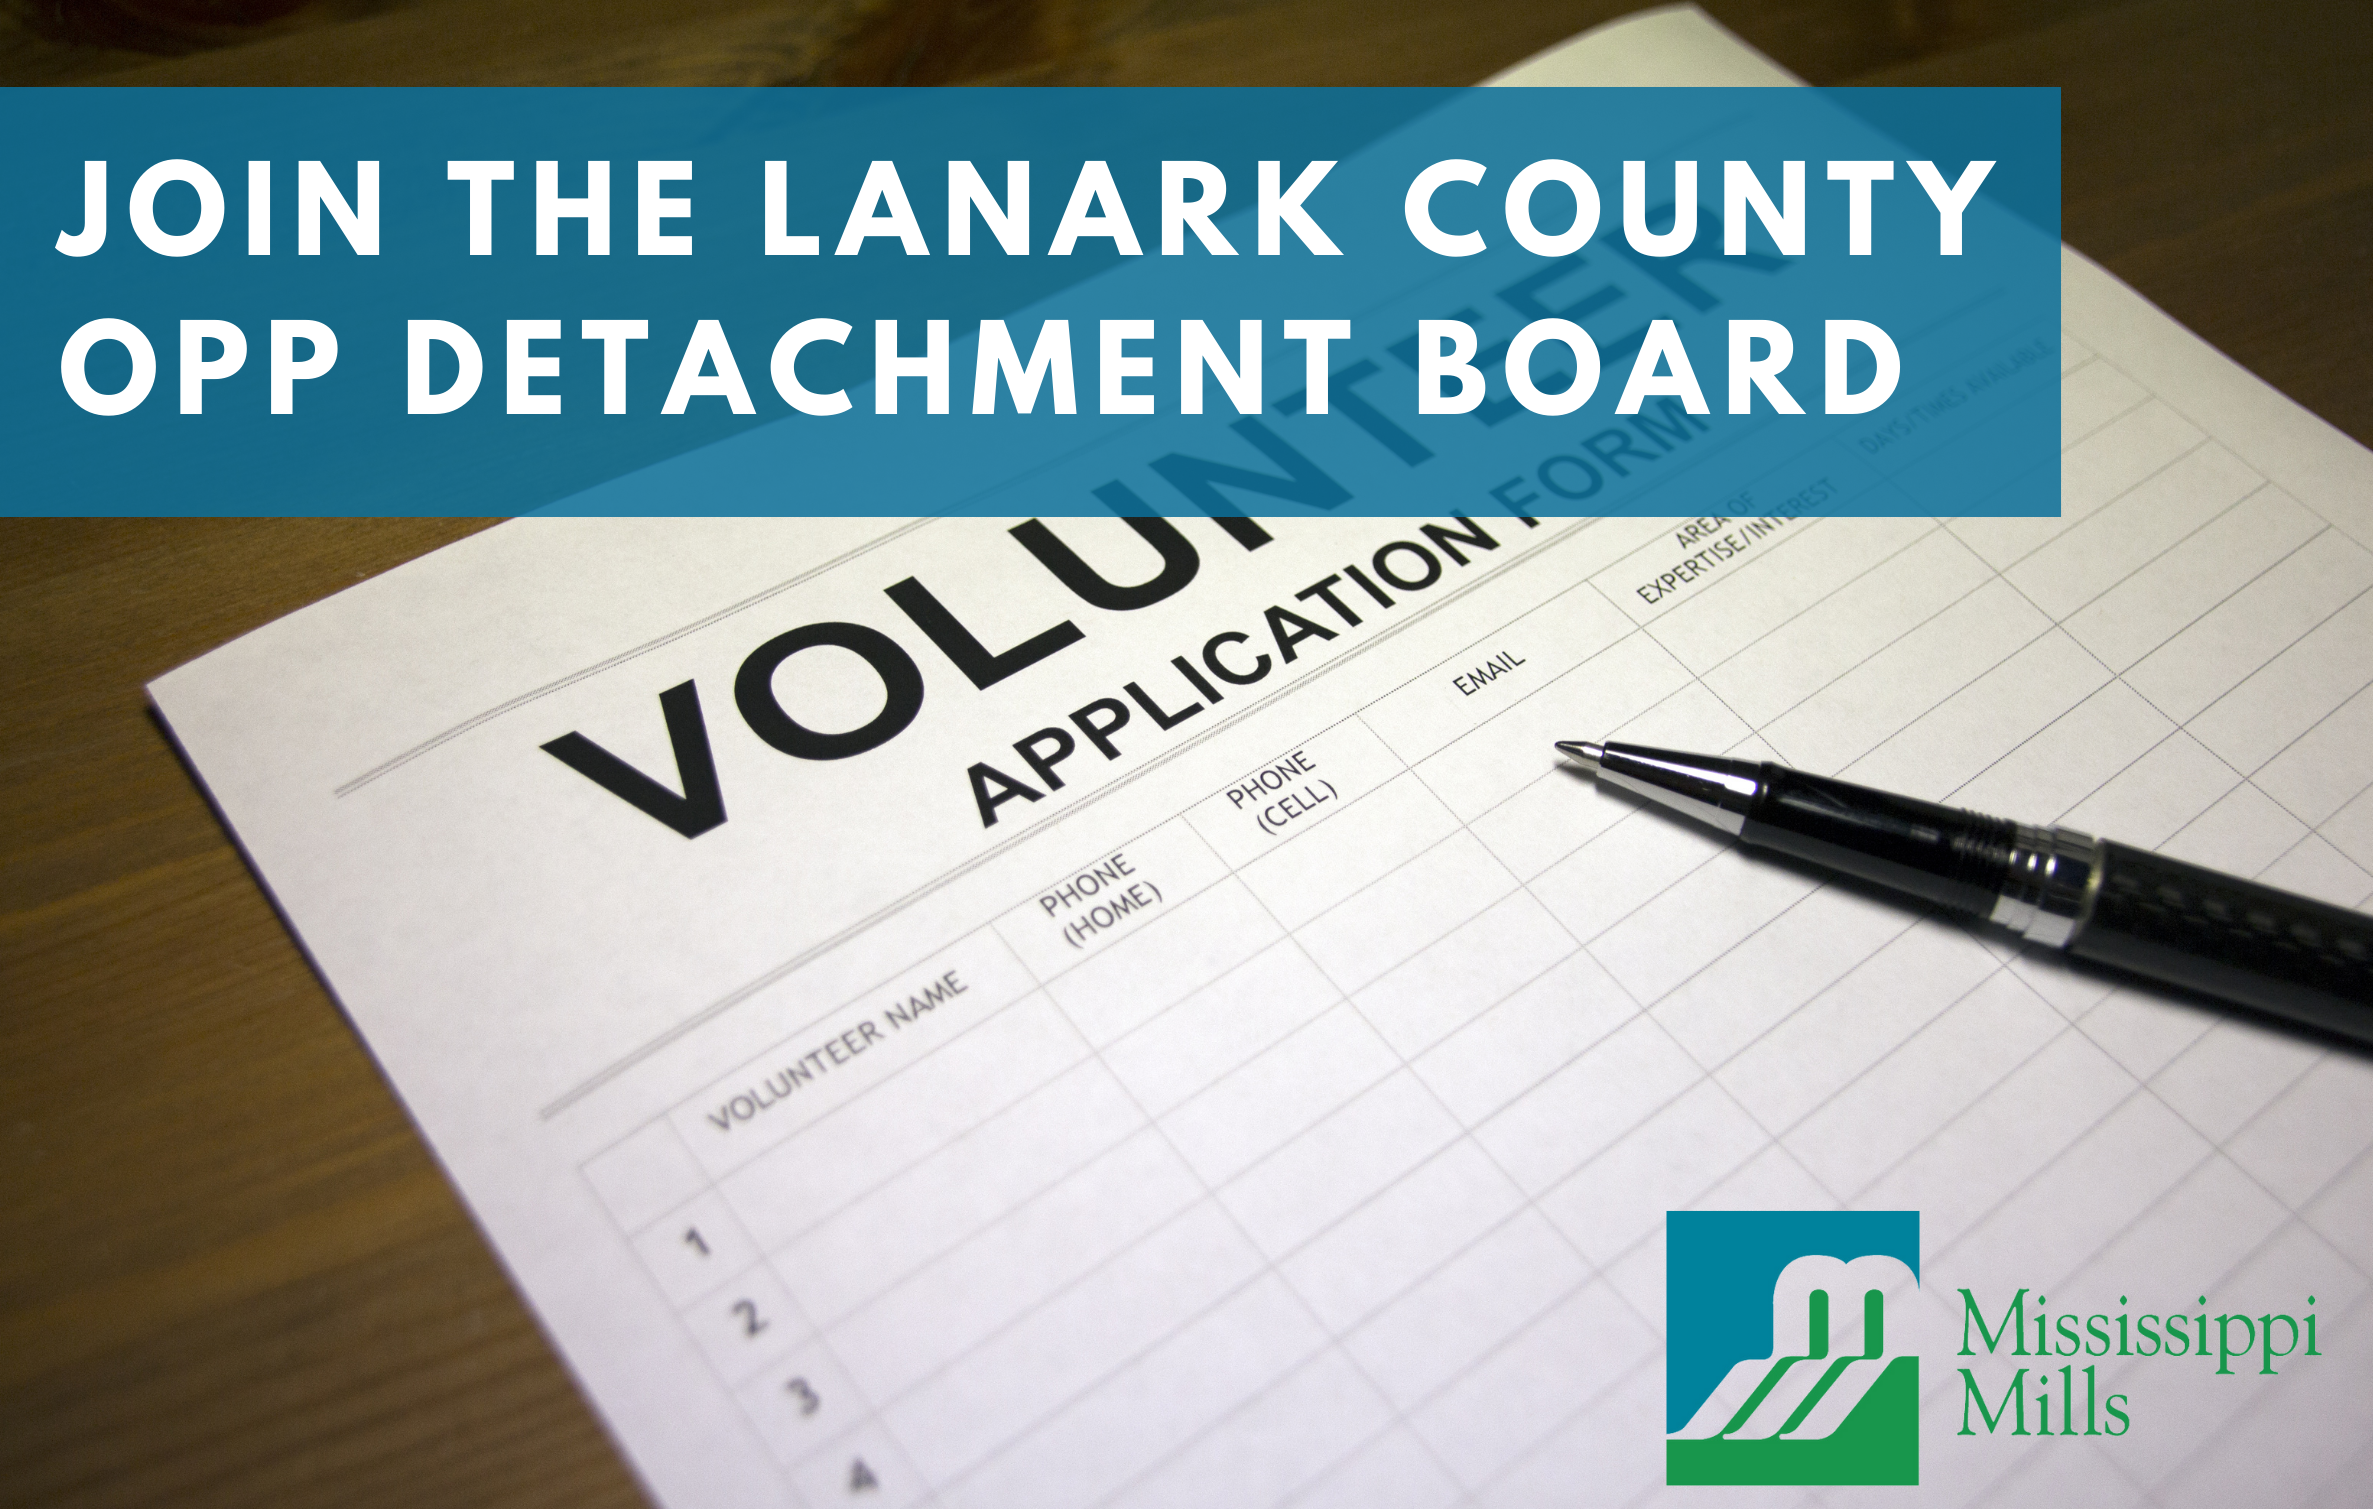 Graphic featuring application form sitting on desk with a pen and the text 'Join the Lanark County OPP Detachment Board'